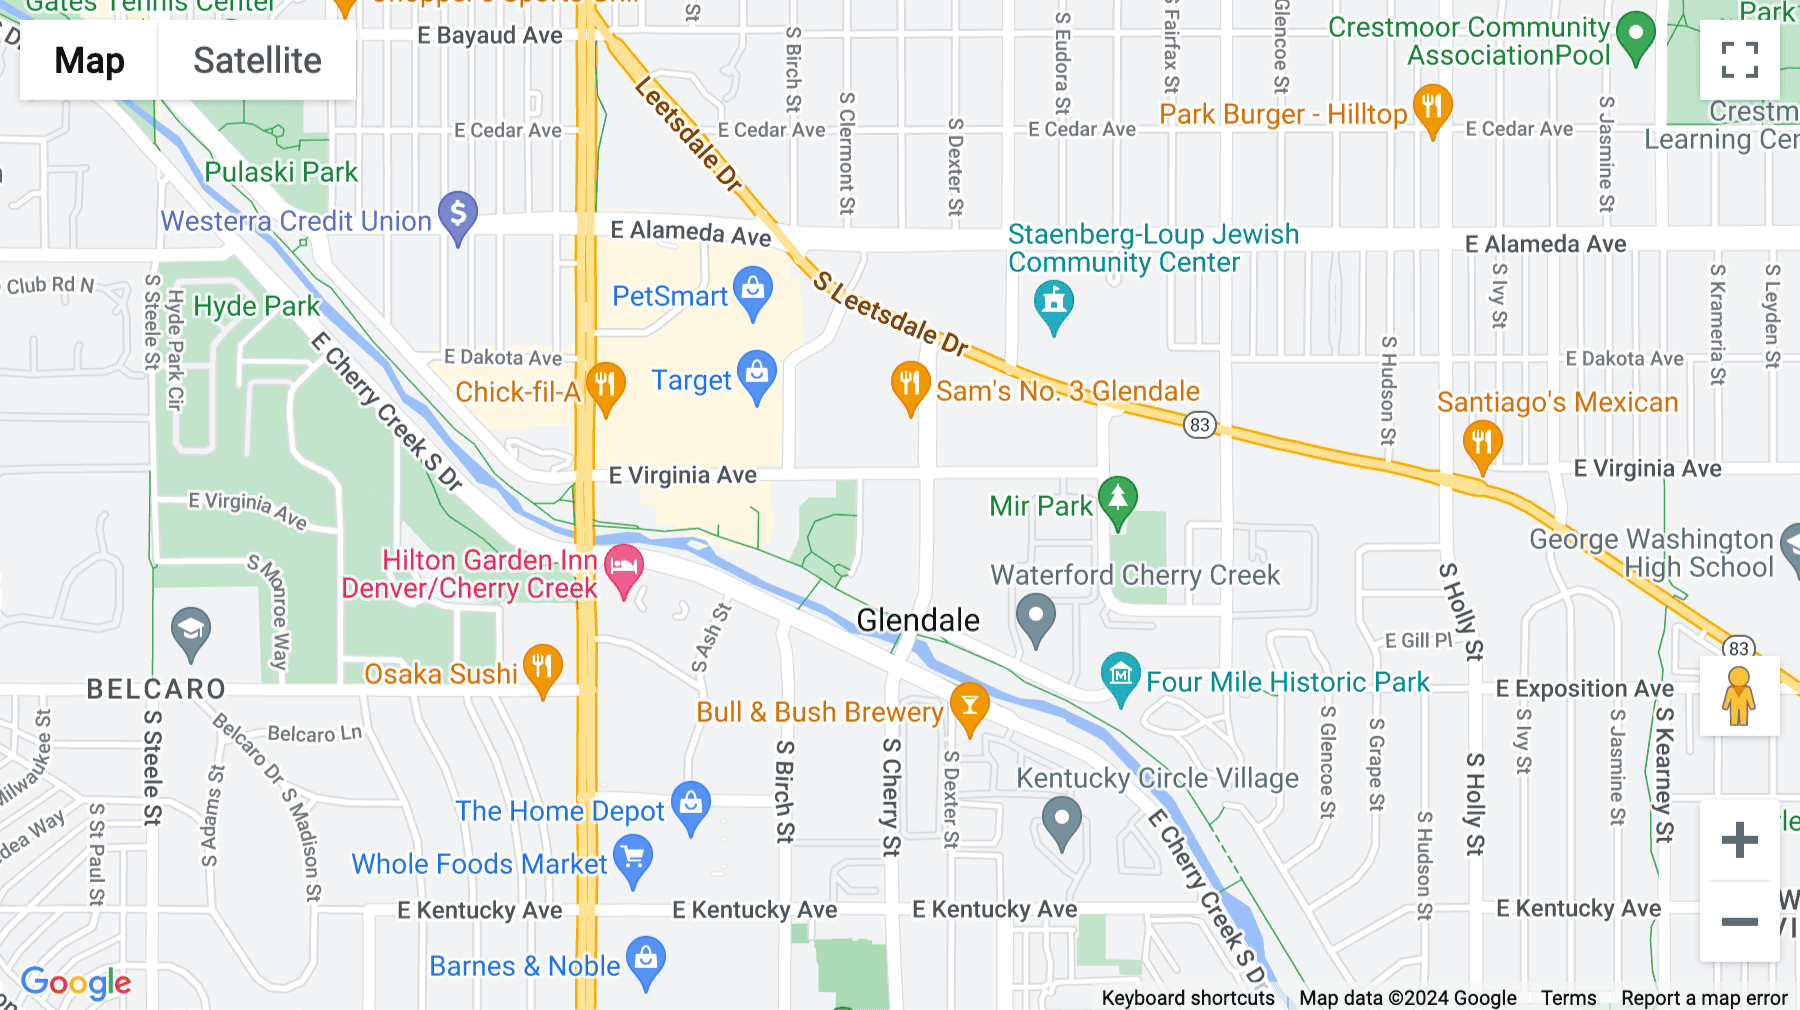 Click for interative map of 501 S. Cherry St, Suite 1100, Denver